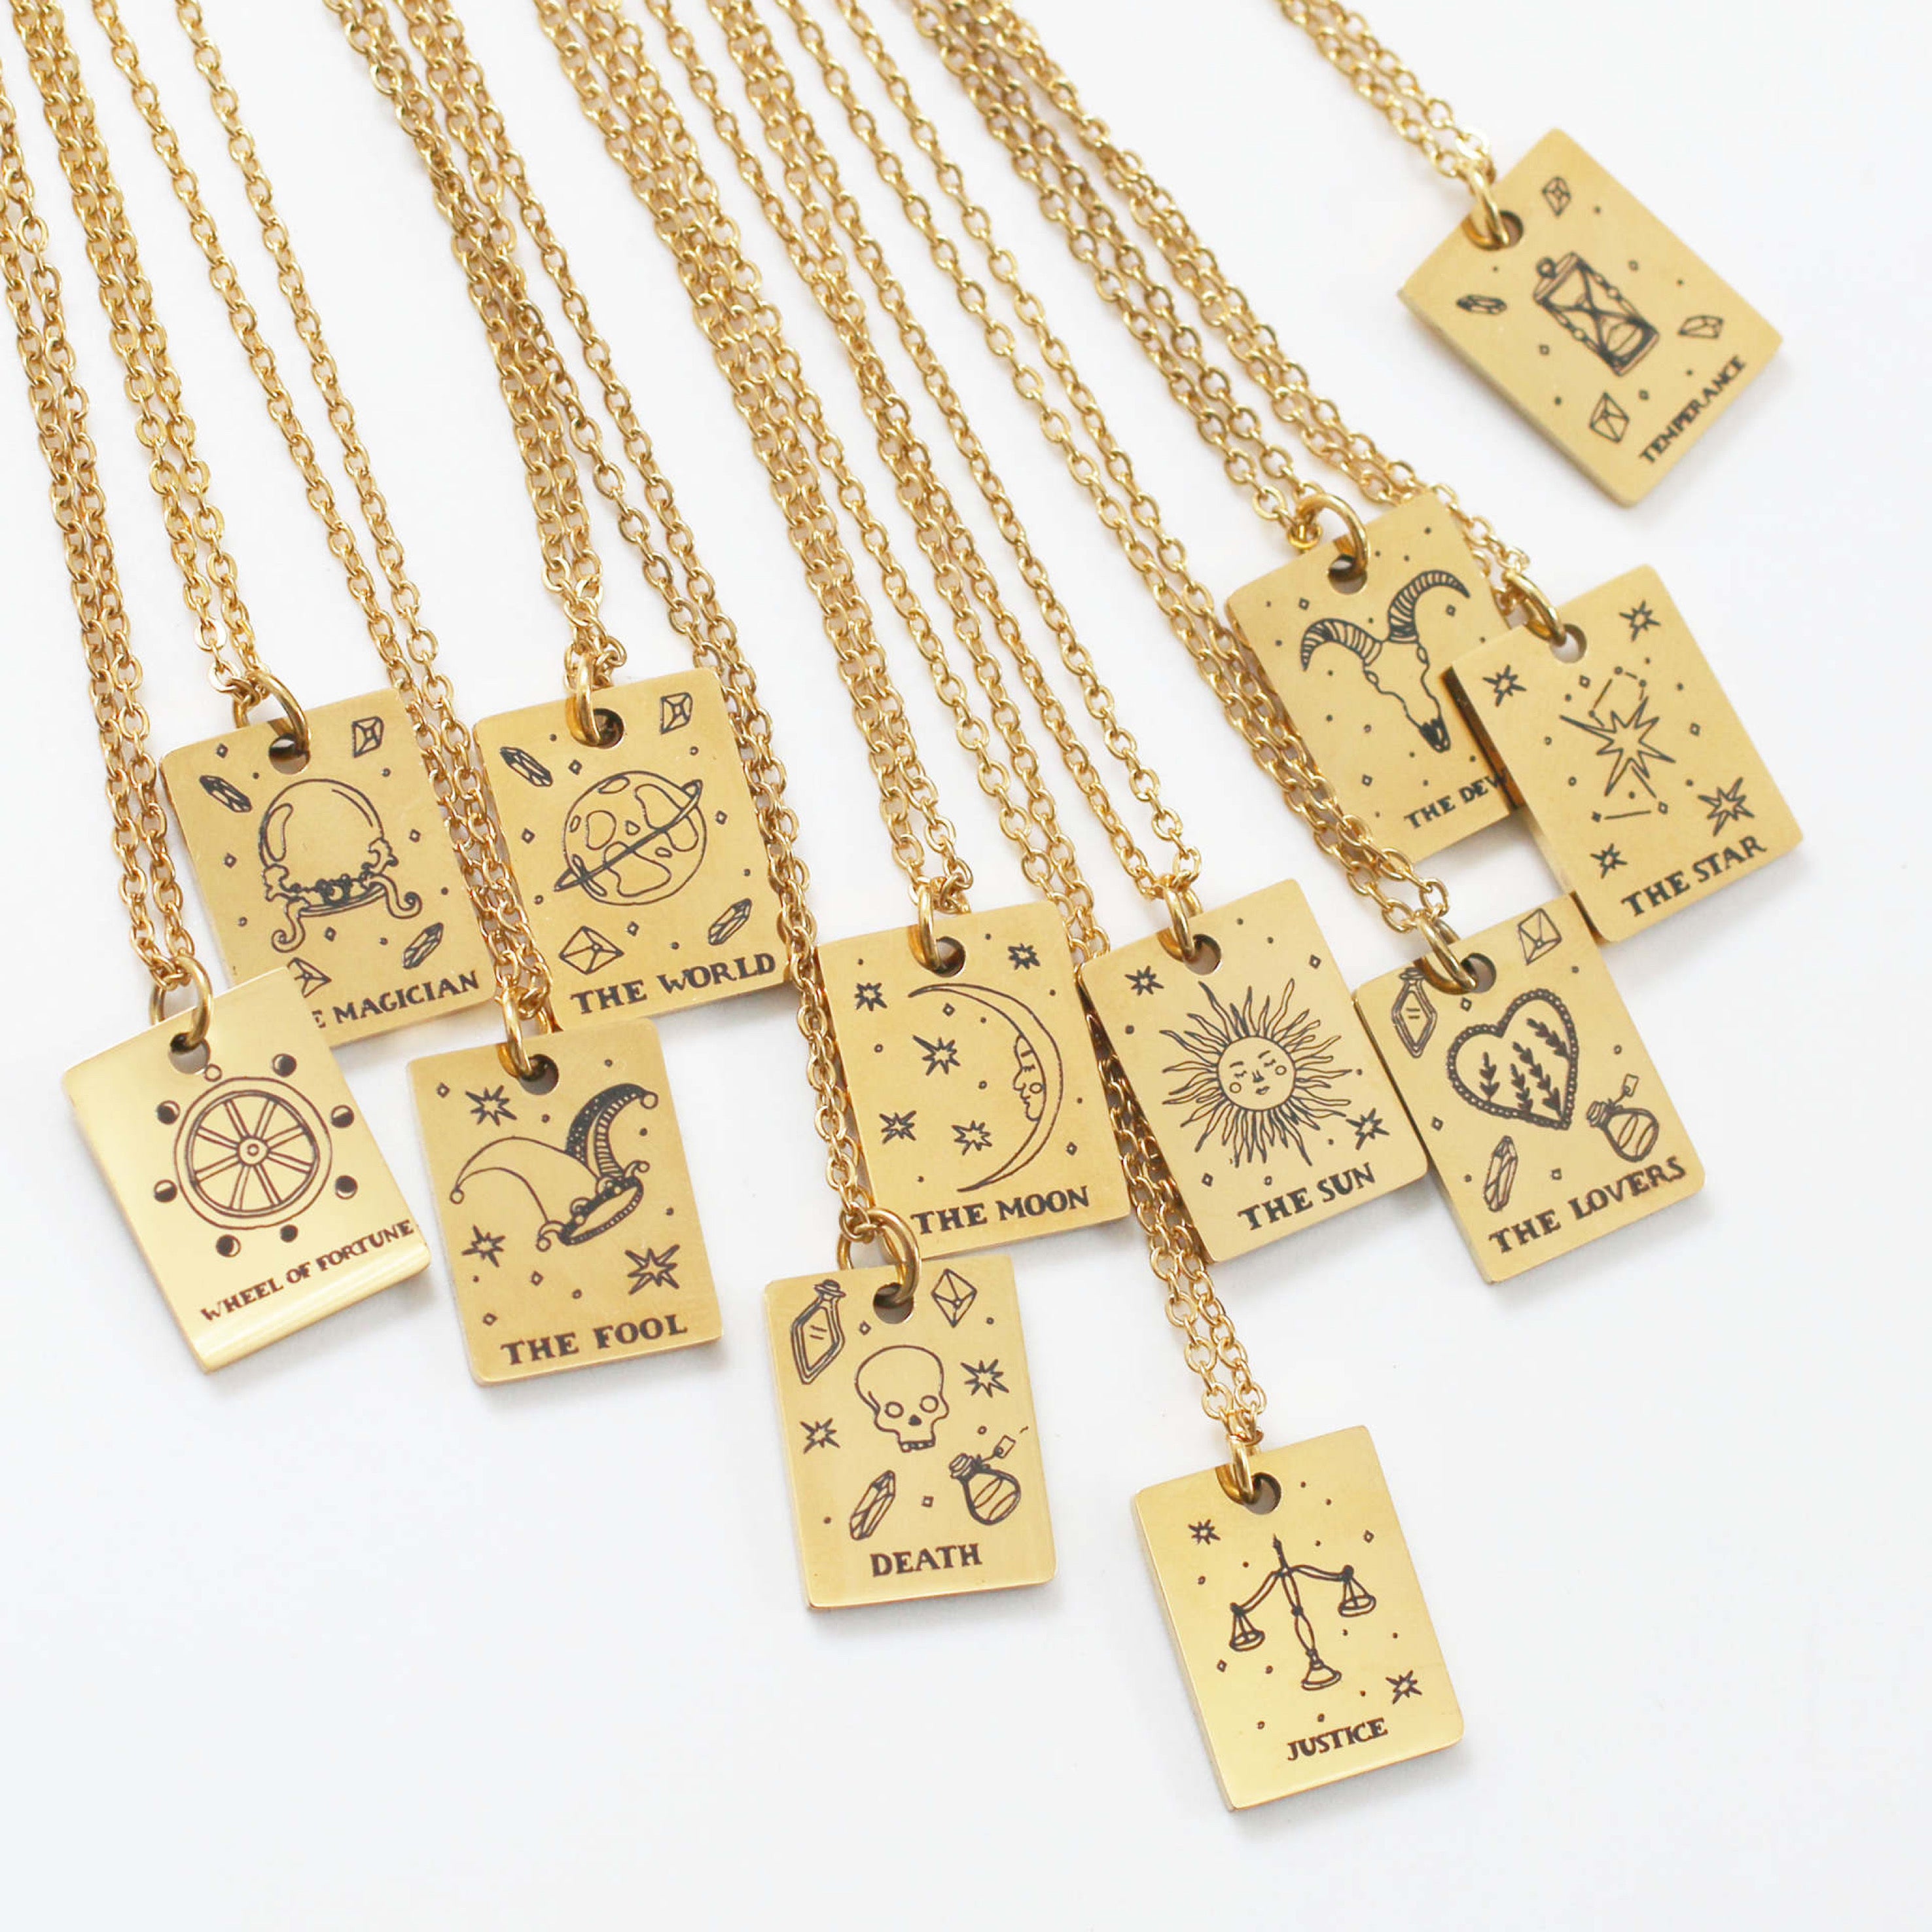 Wheel of Fortune Tarot card pendant Necklace